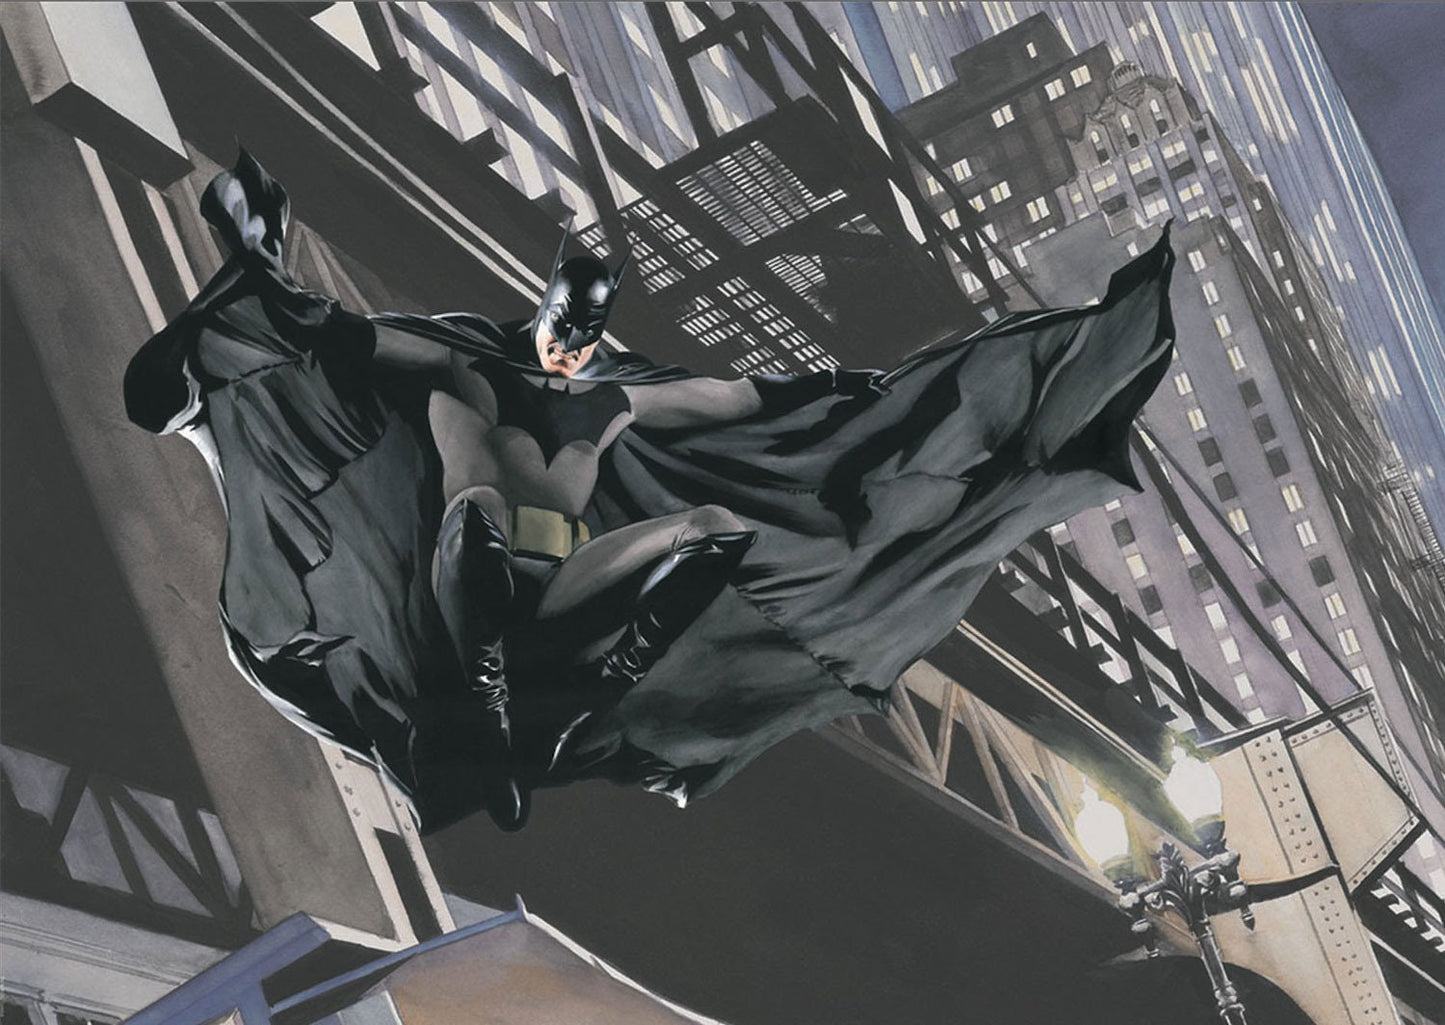 Alex Ross SIGNED Descent on Gotham Batman NYCC 2021 Exclusive Fine Art Print on Paper PRINTER Proof Version Limited Edition of 50